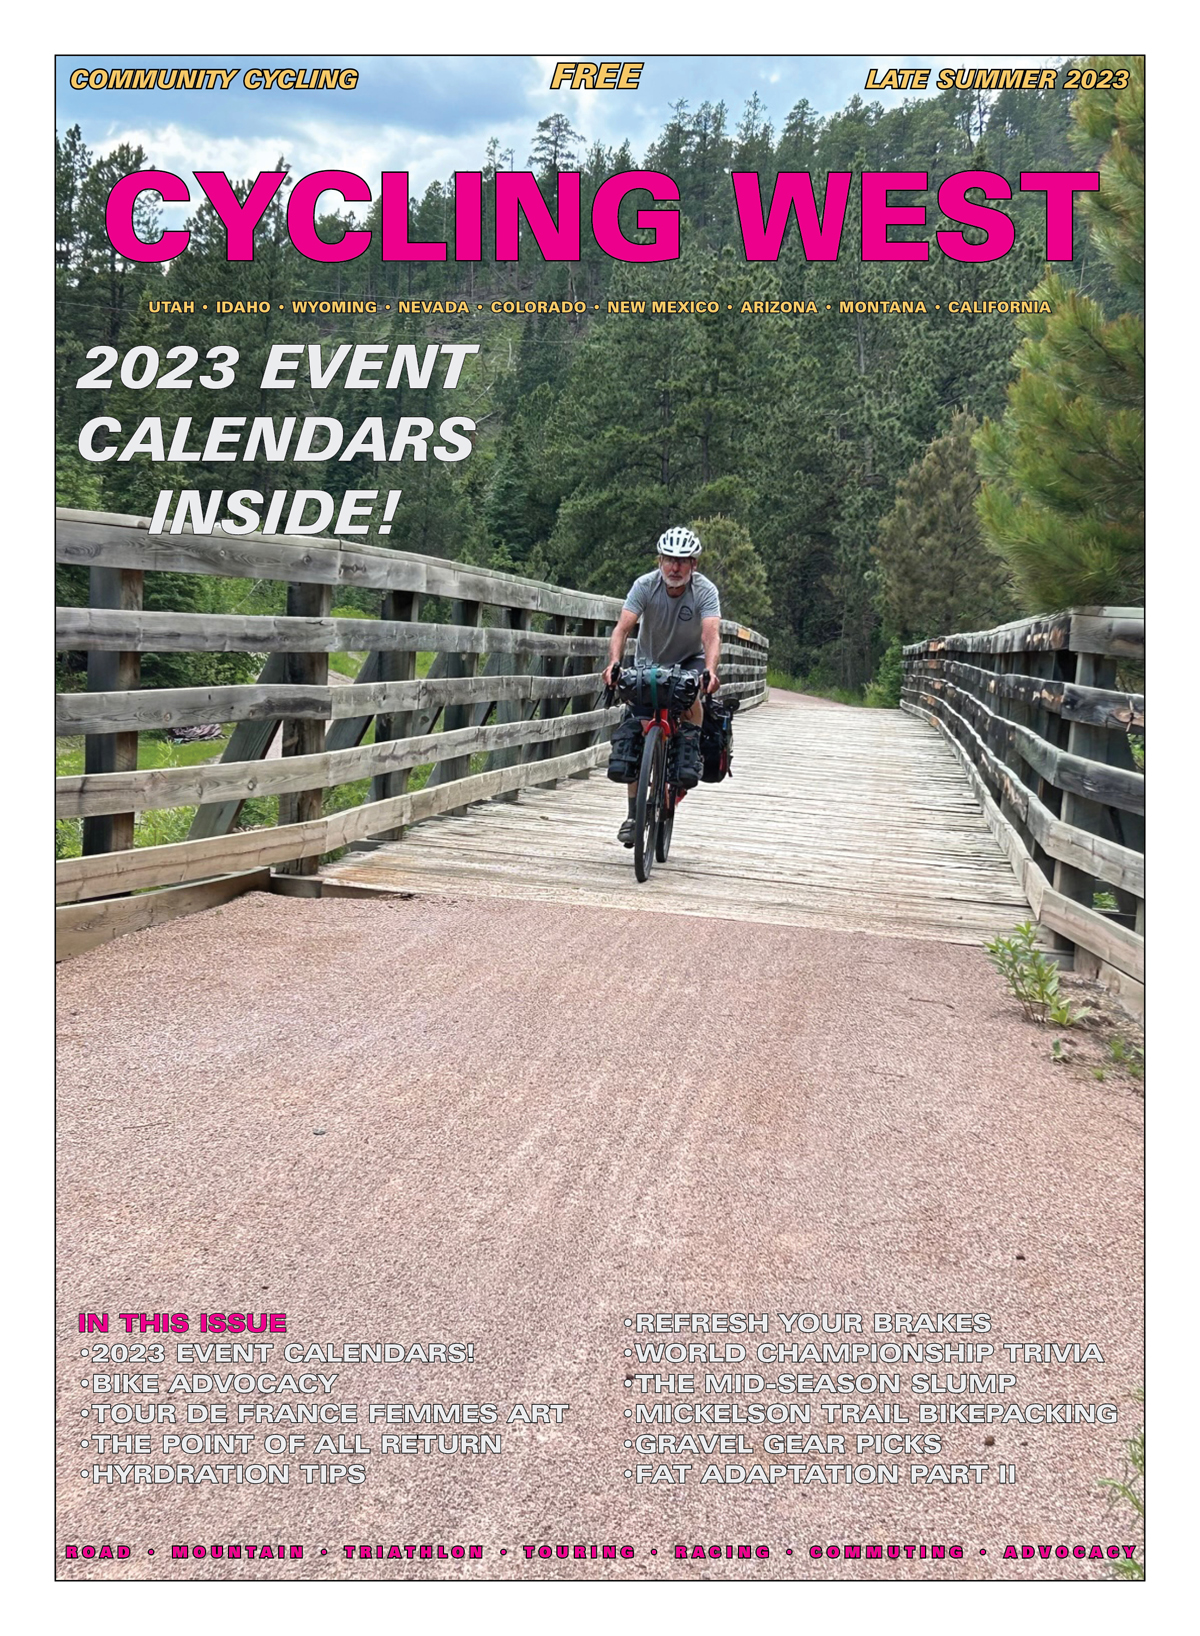 Cycling West Late Summer 2023 Cover Photo: Lou Melini on one of the many bridges on South Dakota’s Mickelson Trail. Photo by Julie Melini